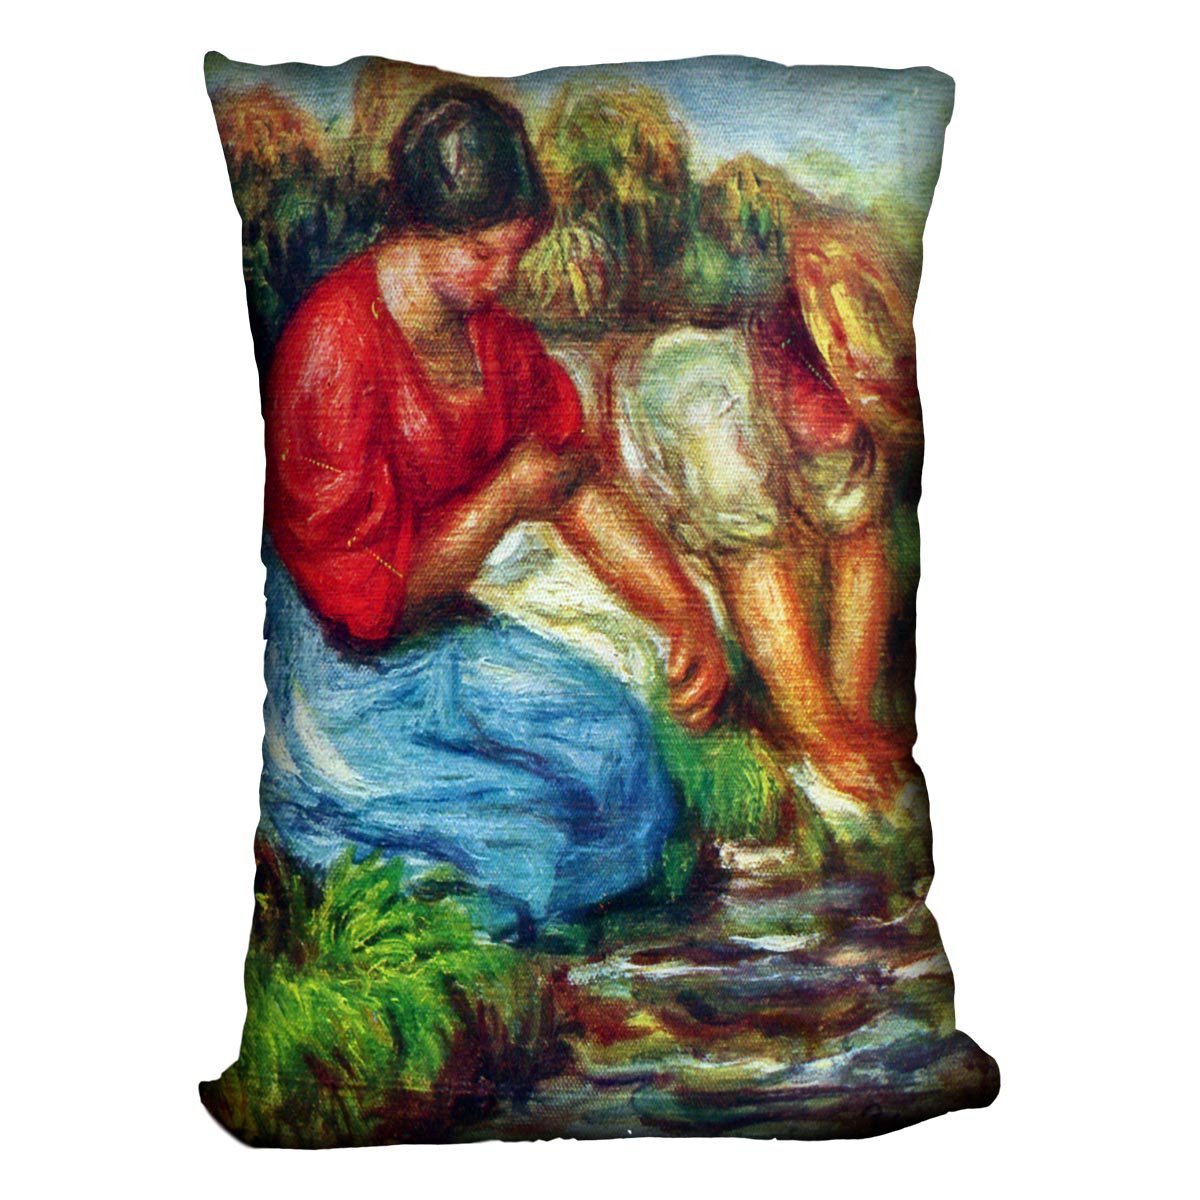 Laundresses 1 by Renoir Throw Pillow